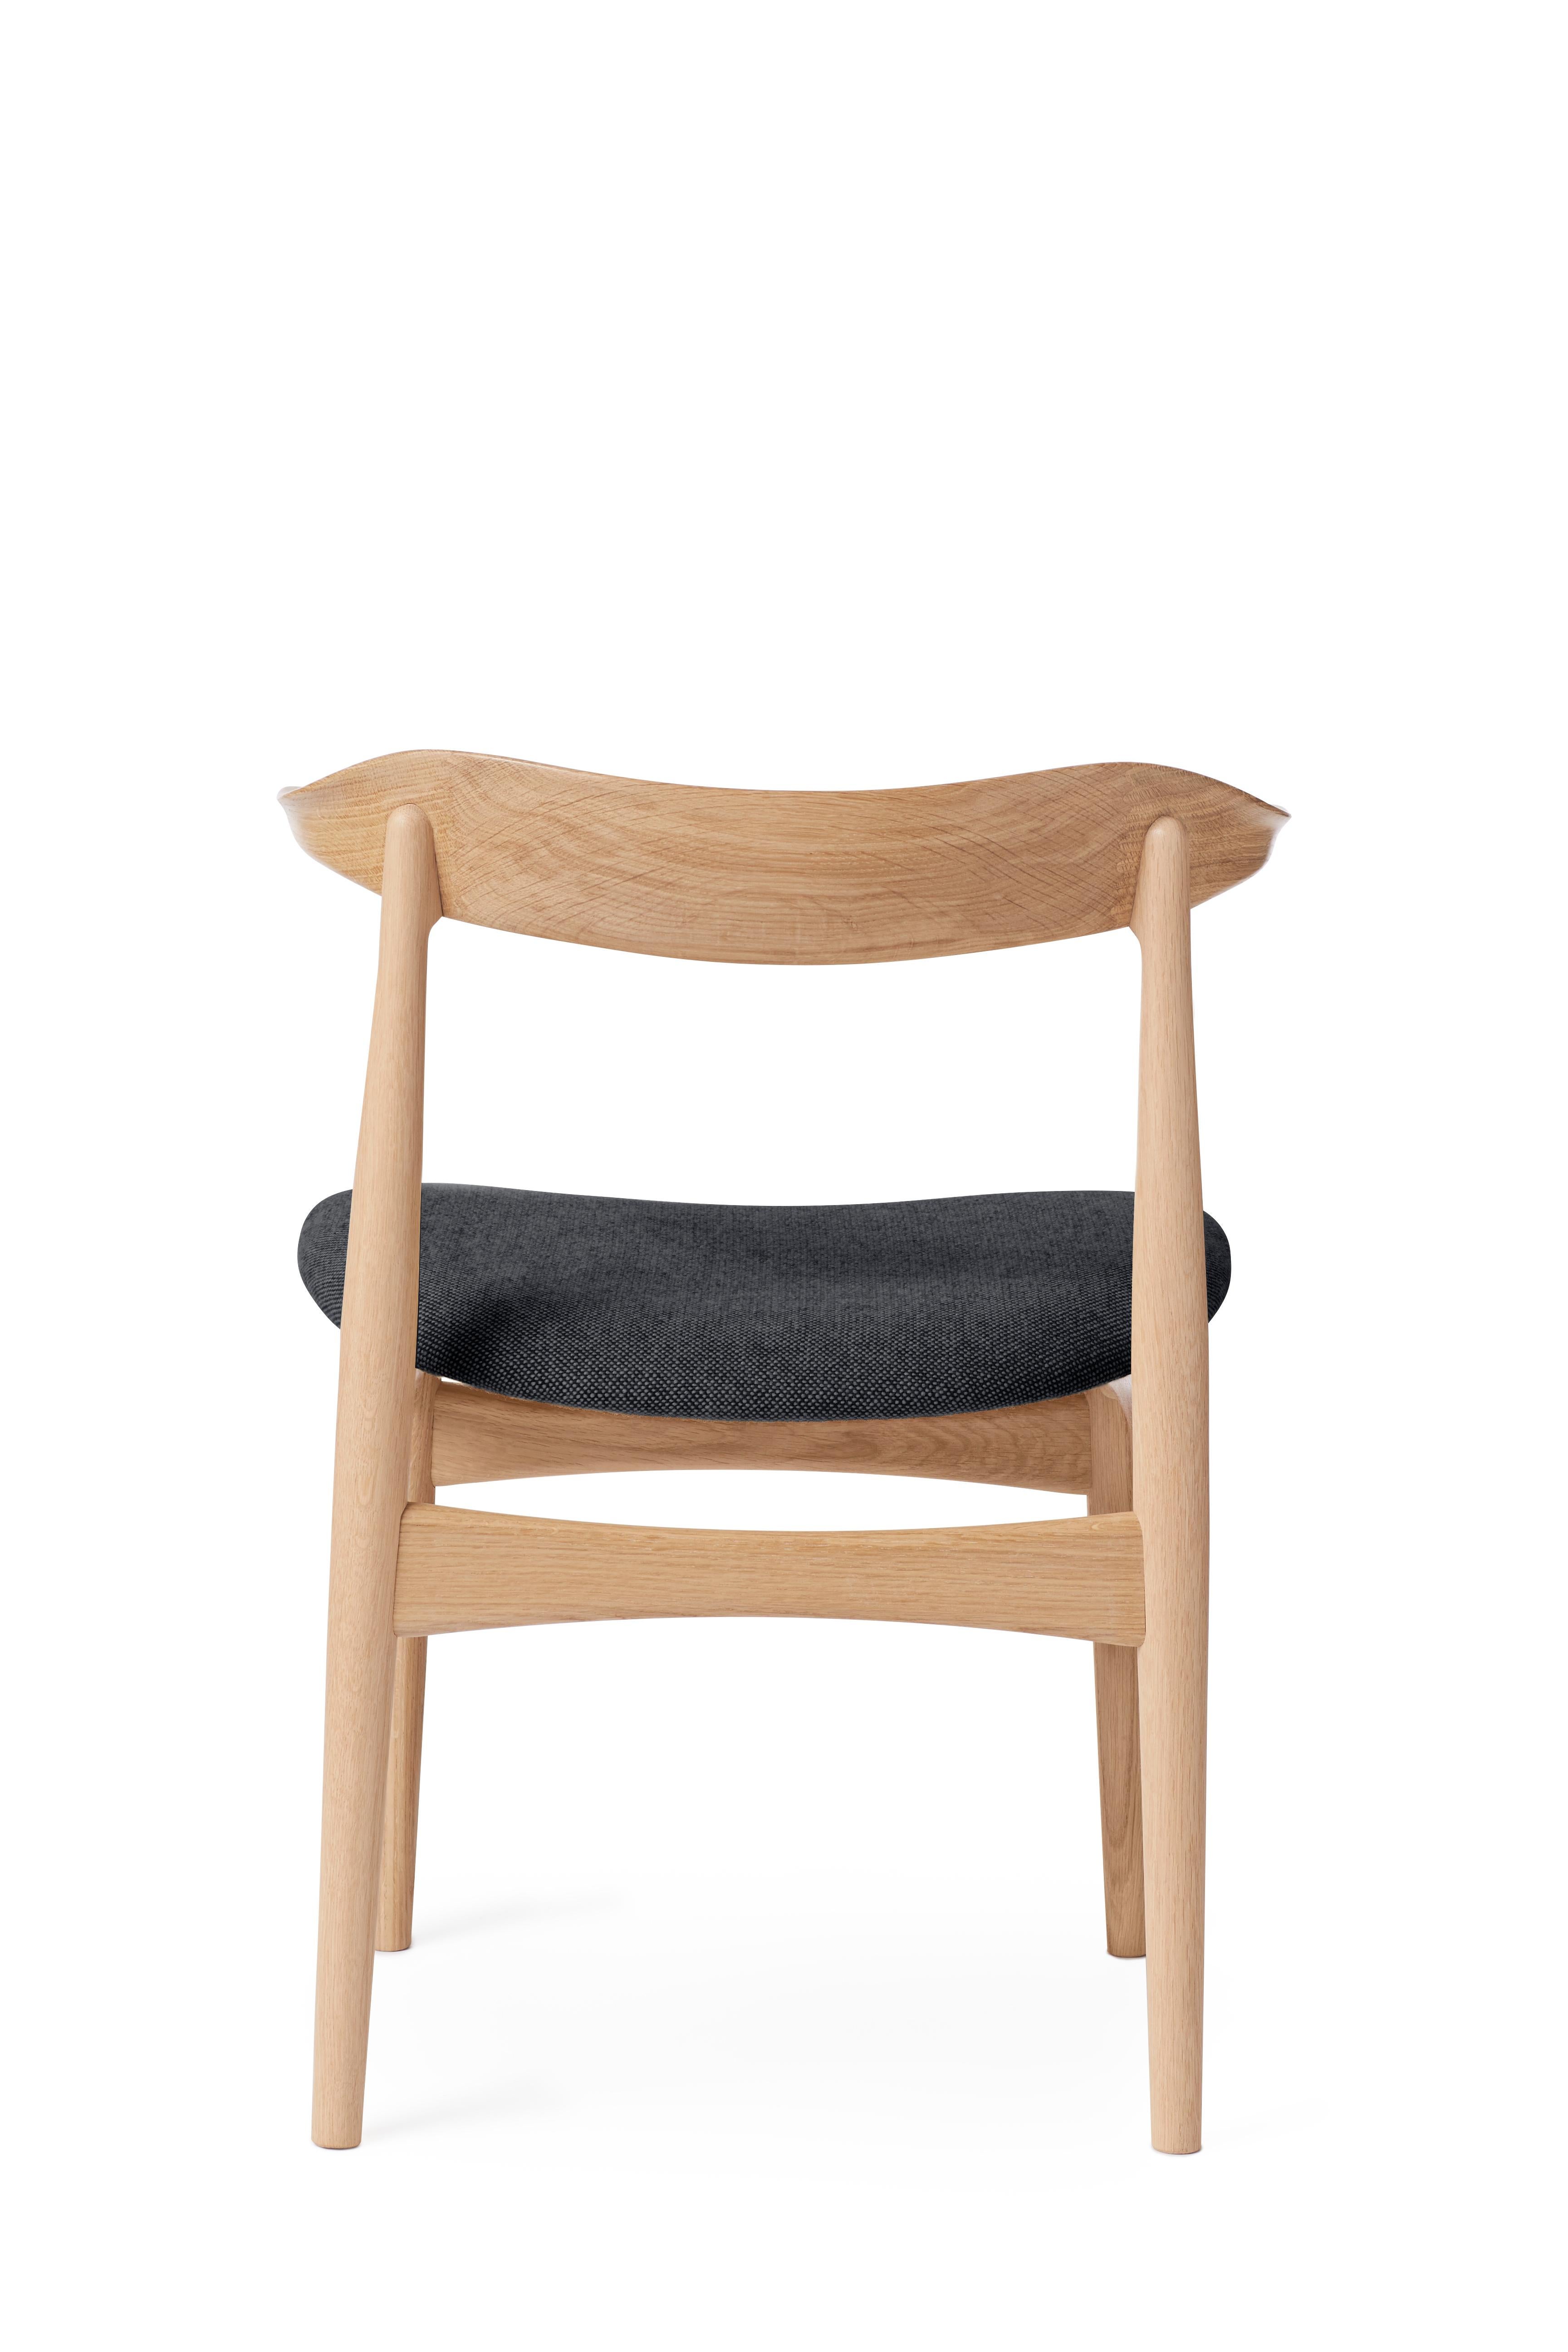 For Sale: Black (Hallingdal 180) Cow Horn Oak Chair, by Knud Færch from Warm Nordic 3